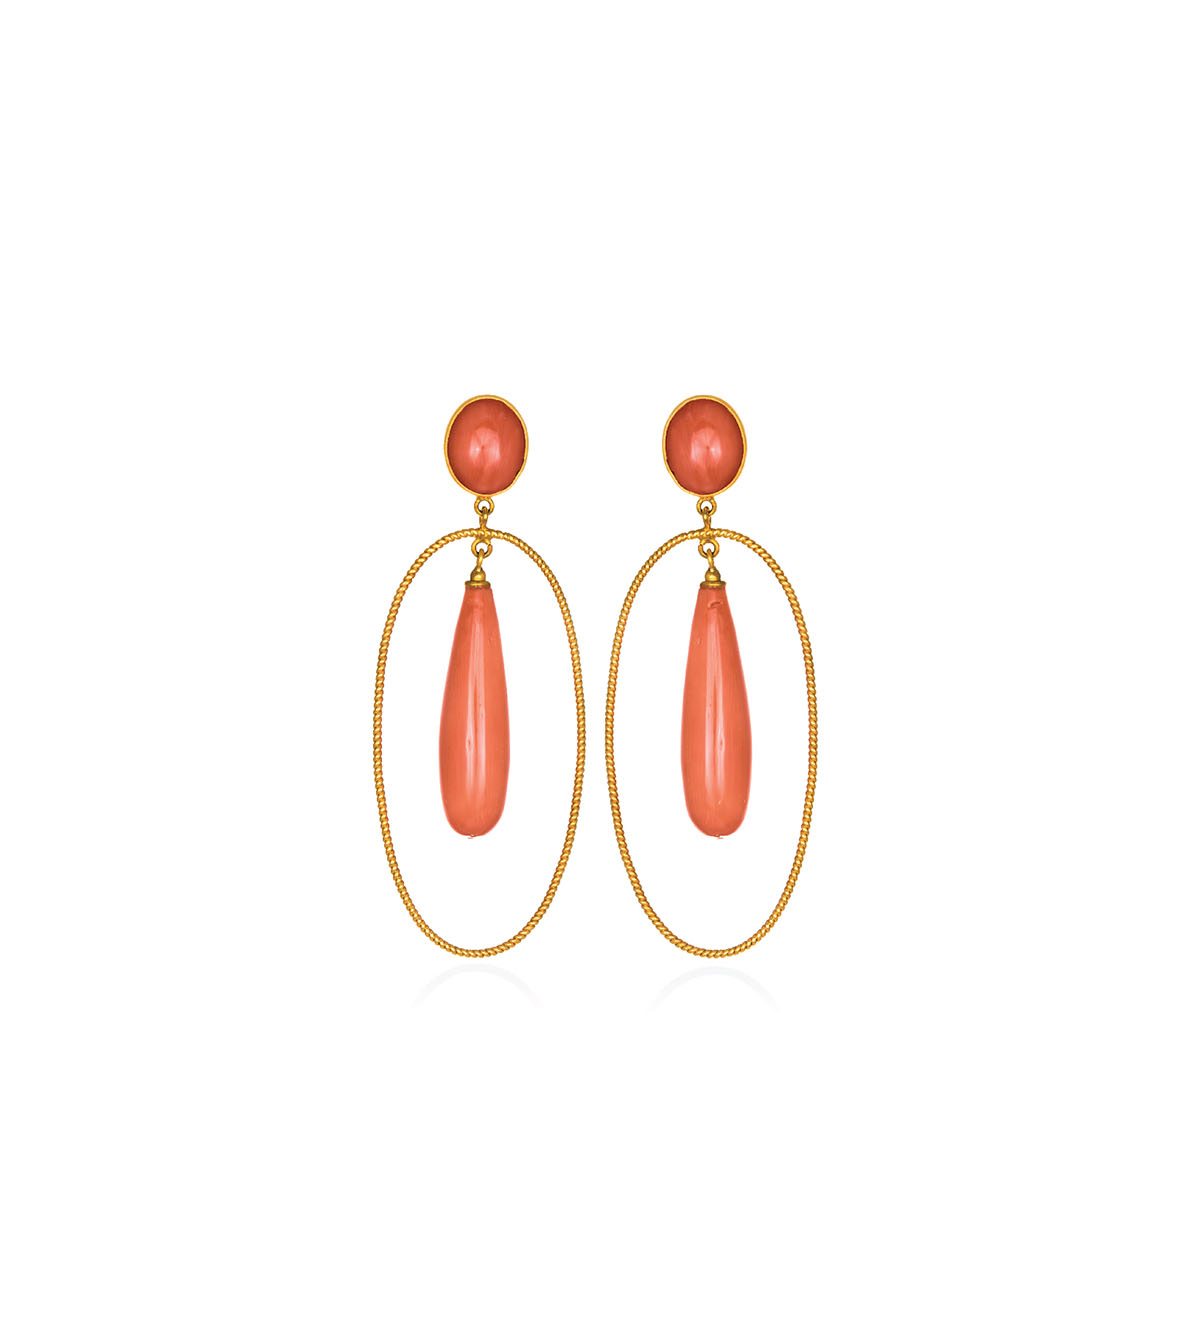 Pendulum Earrings with Orange Coral by Christina Soubli